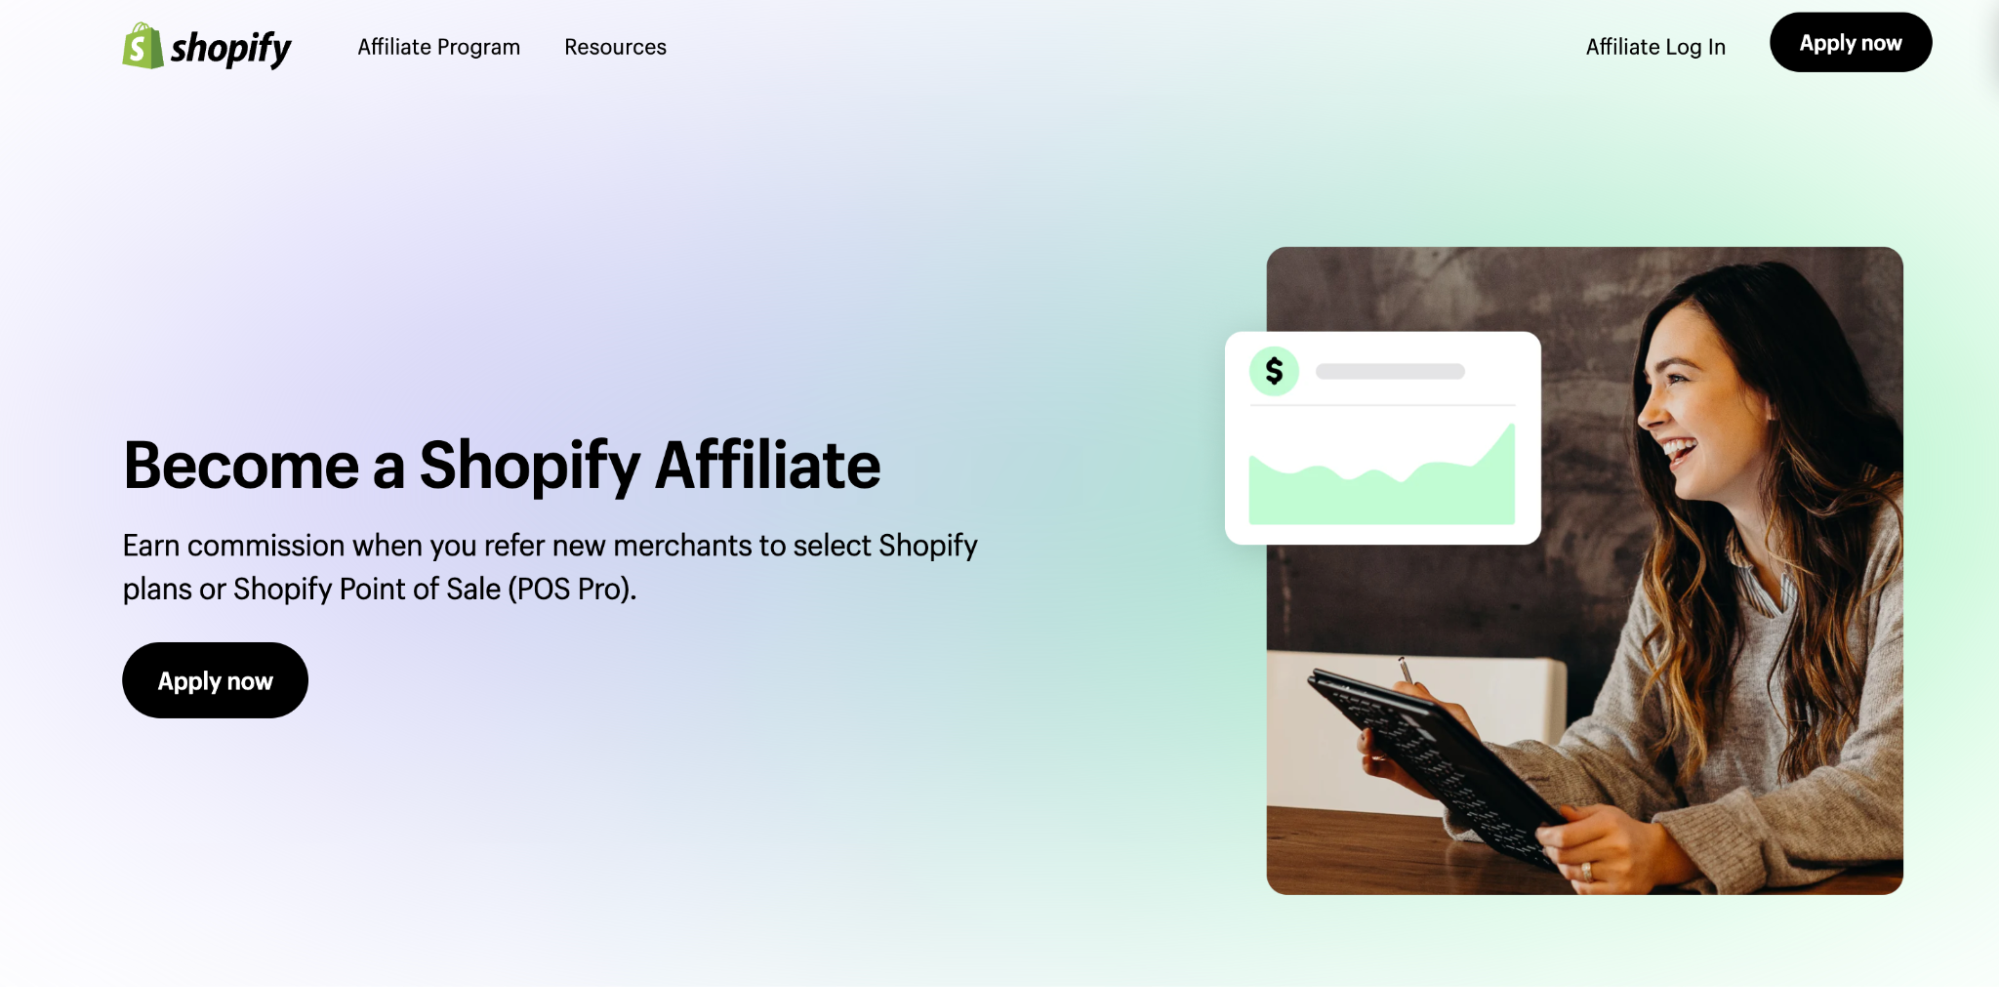 A screenshot of Shopify's Affiliate Program page